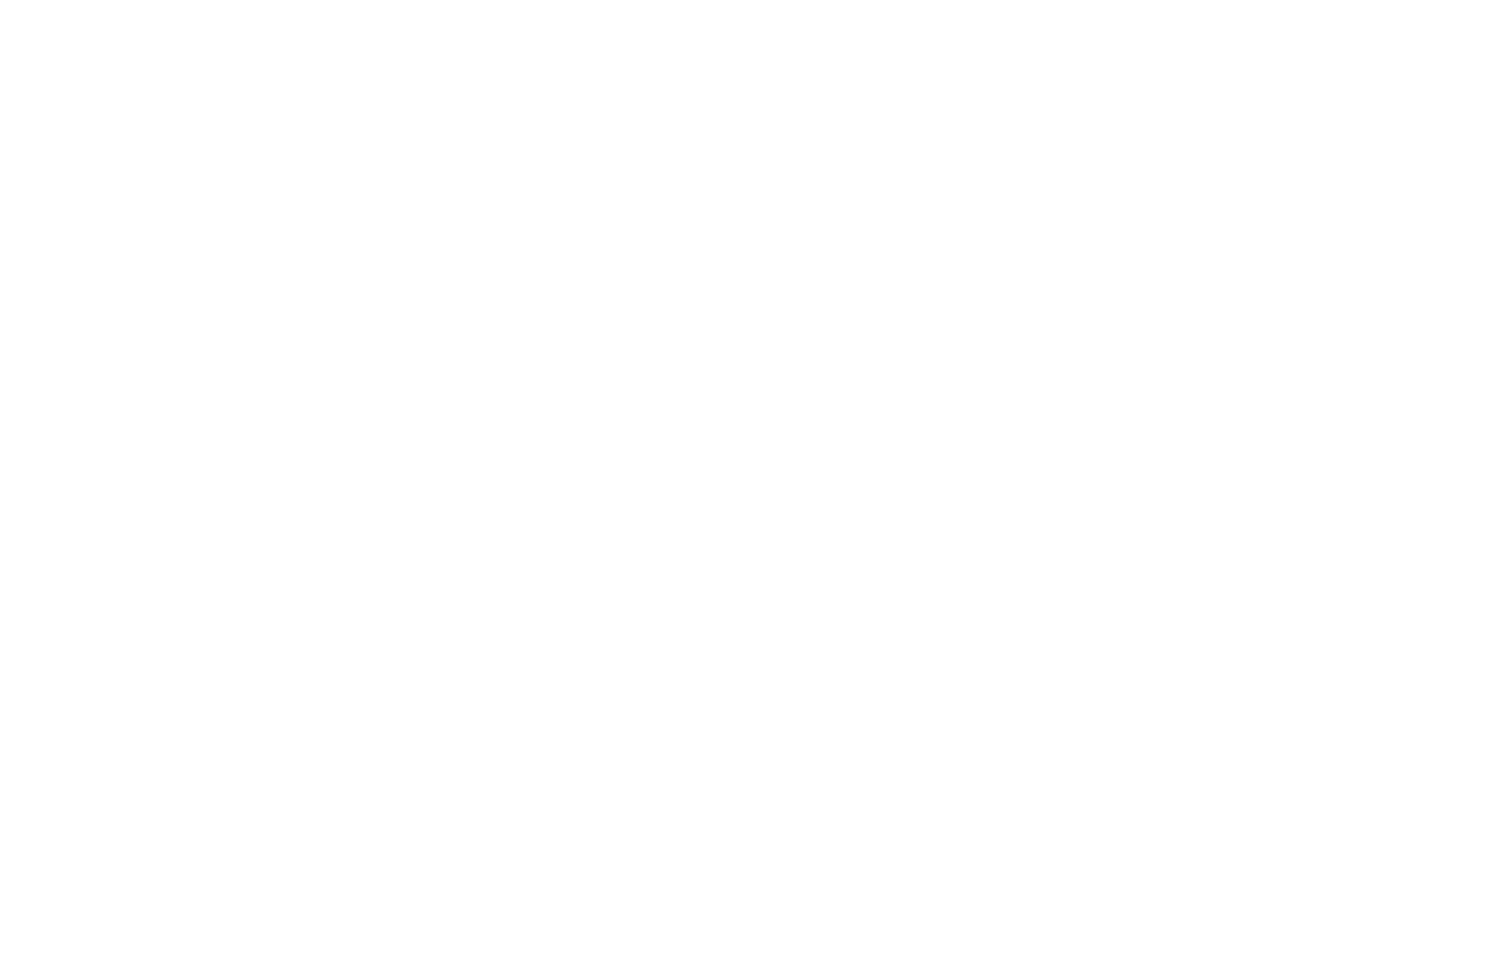 The Costa Group